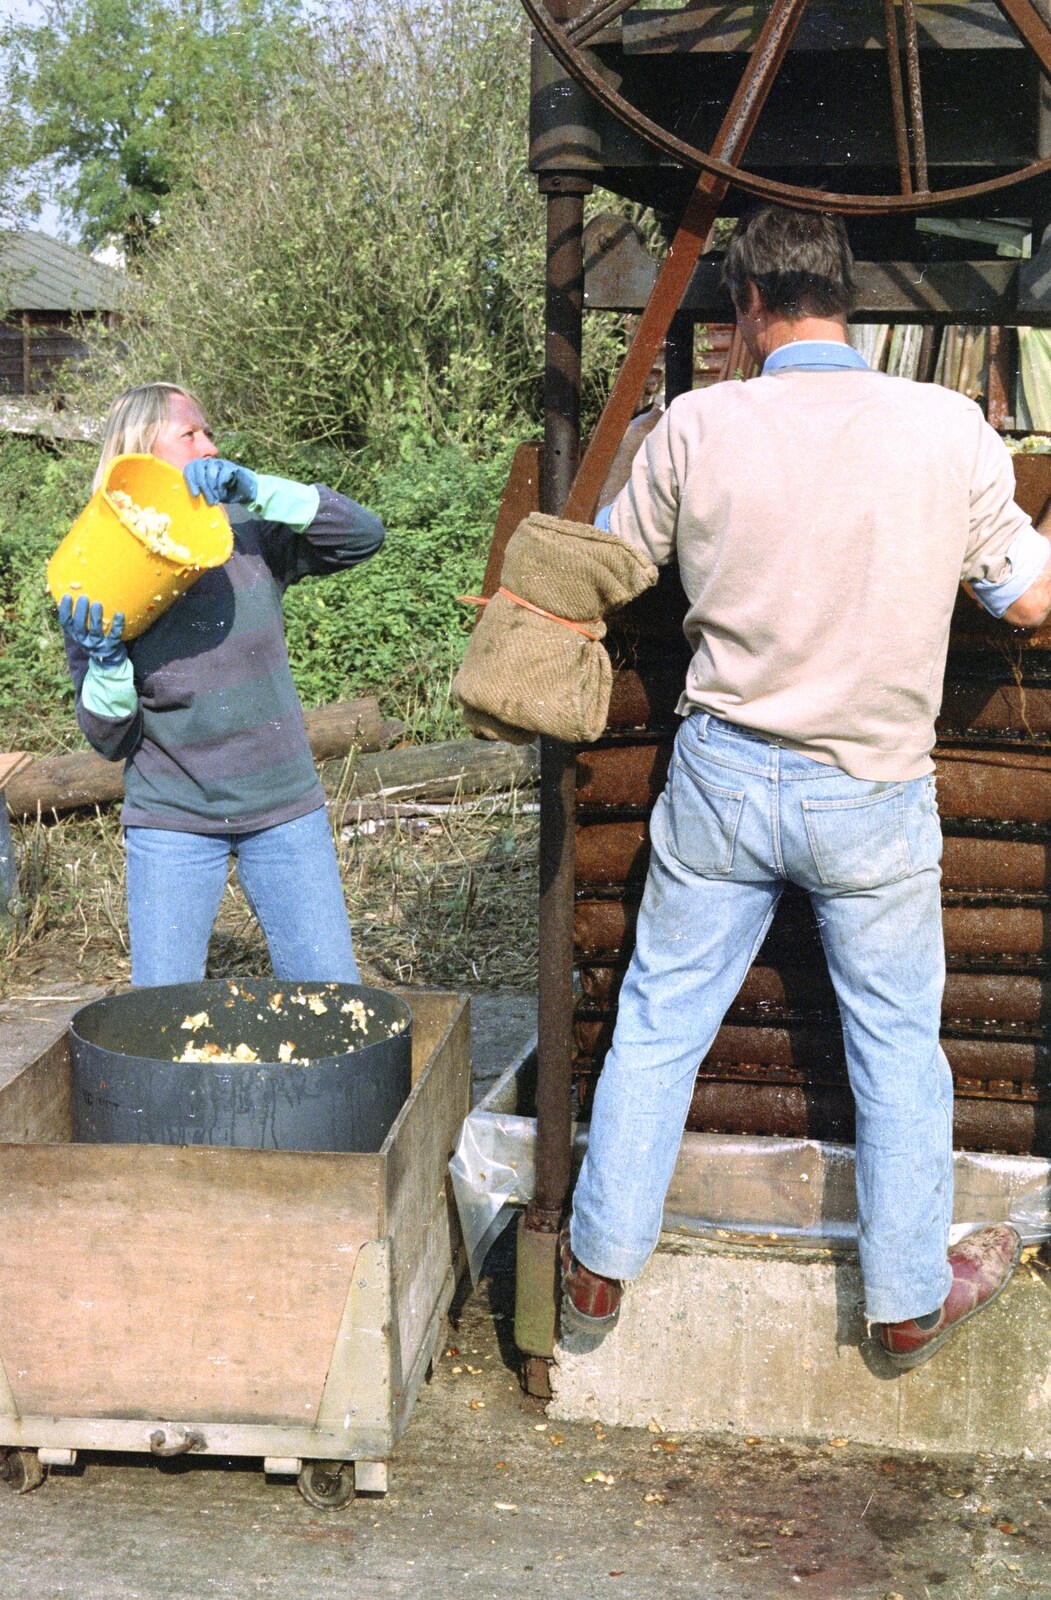 Cider Making (without Rosie), Stuston, Suffolk - 23rd September 1994: Mad Sue hurls some chopped apple into a cheese